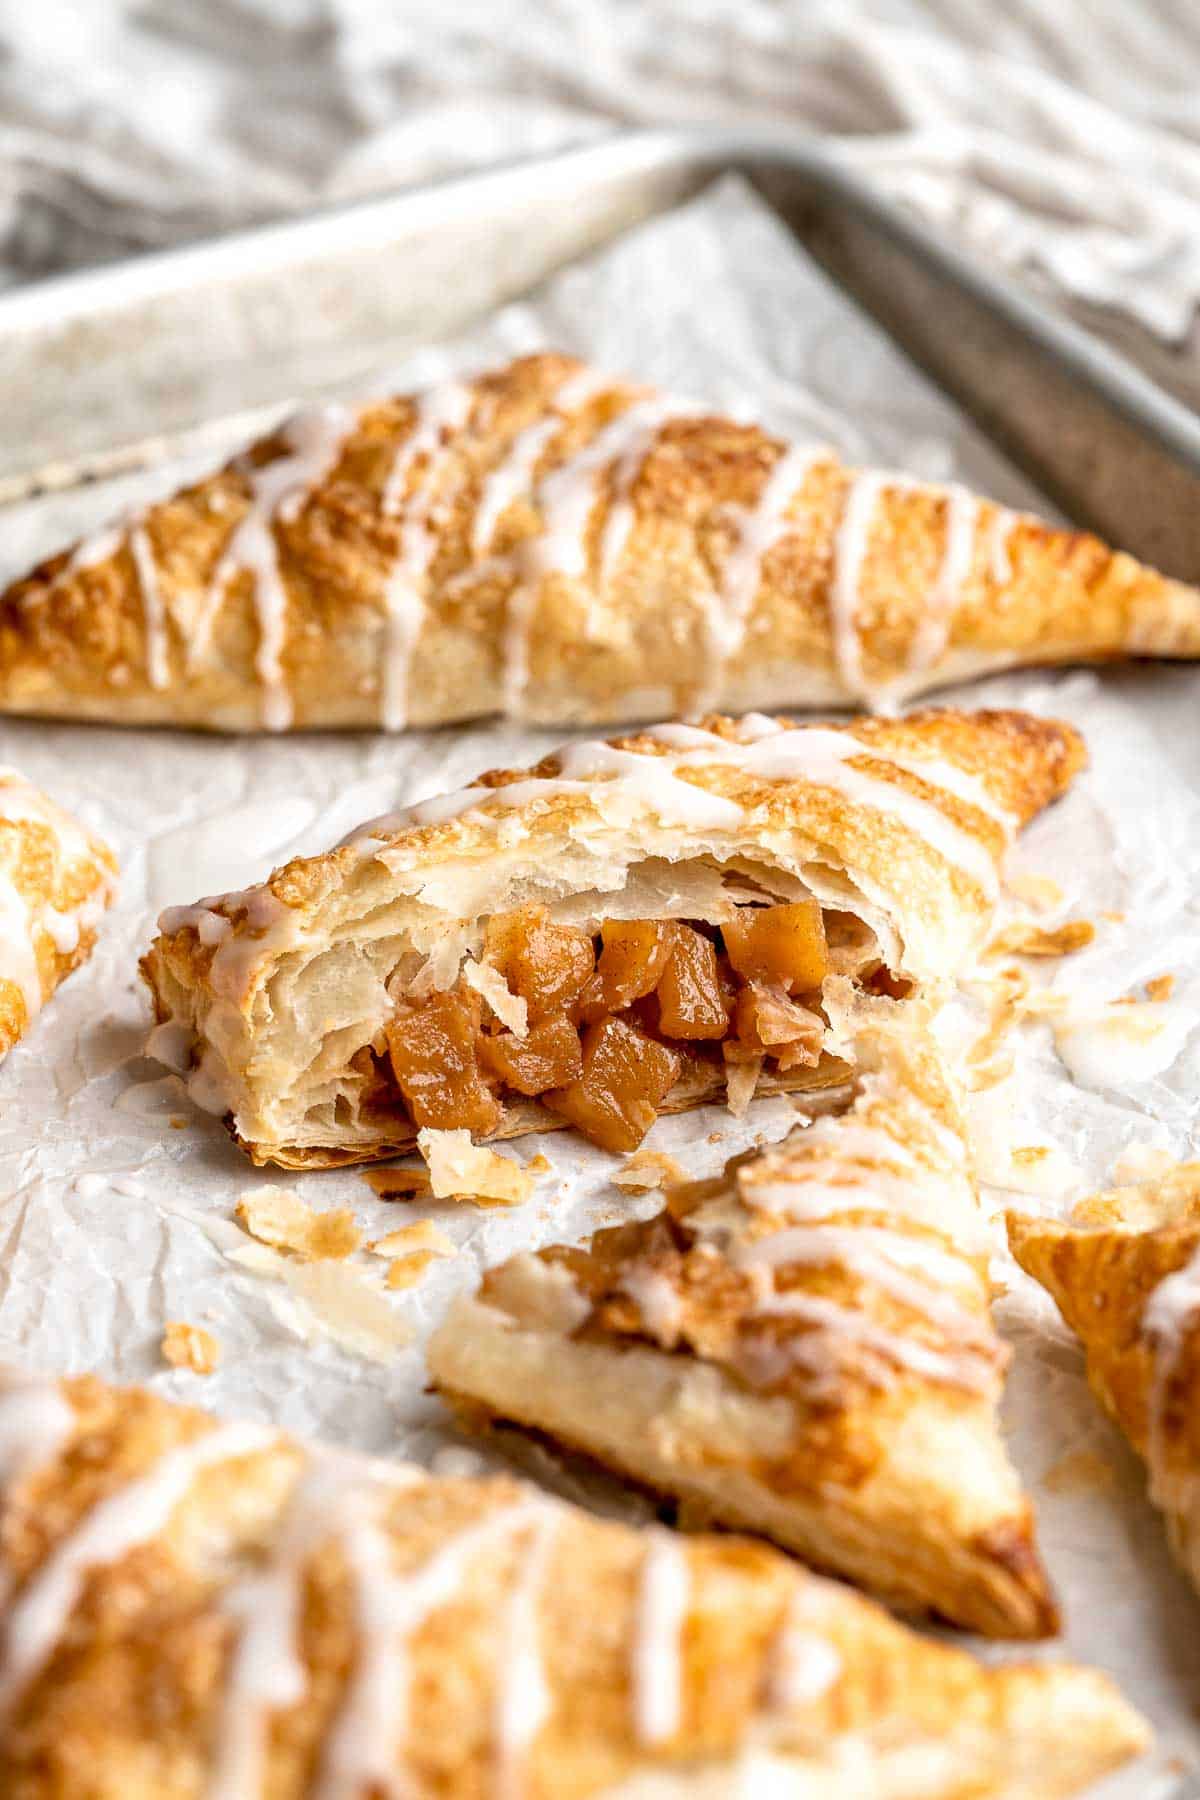 With a buttery, flaky crust and spiced sweet apple filling, these homemade Apple Turnovers are hands down one of the best ways to enjoy this seasonal fruit. | aheadofthyme.com